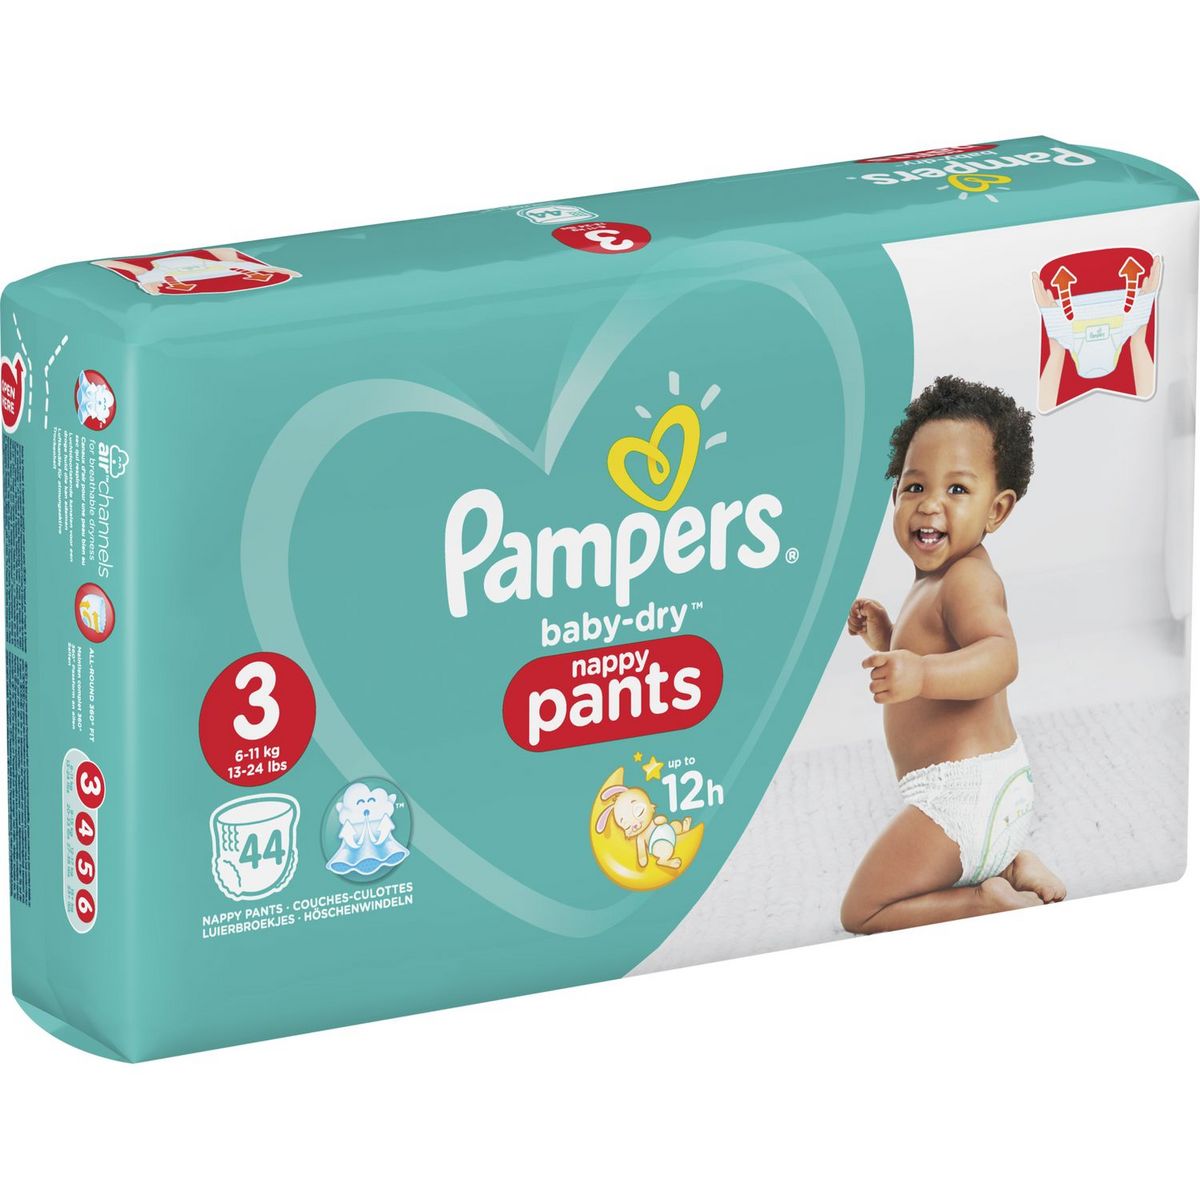 PAMPERS Baby-dry pants couches-culottes taille 3 (6-11kg) 44 couches pas  cher 